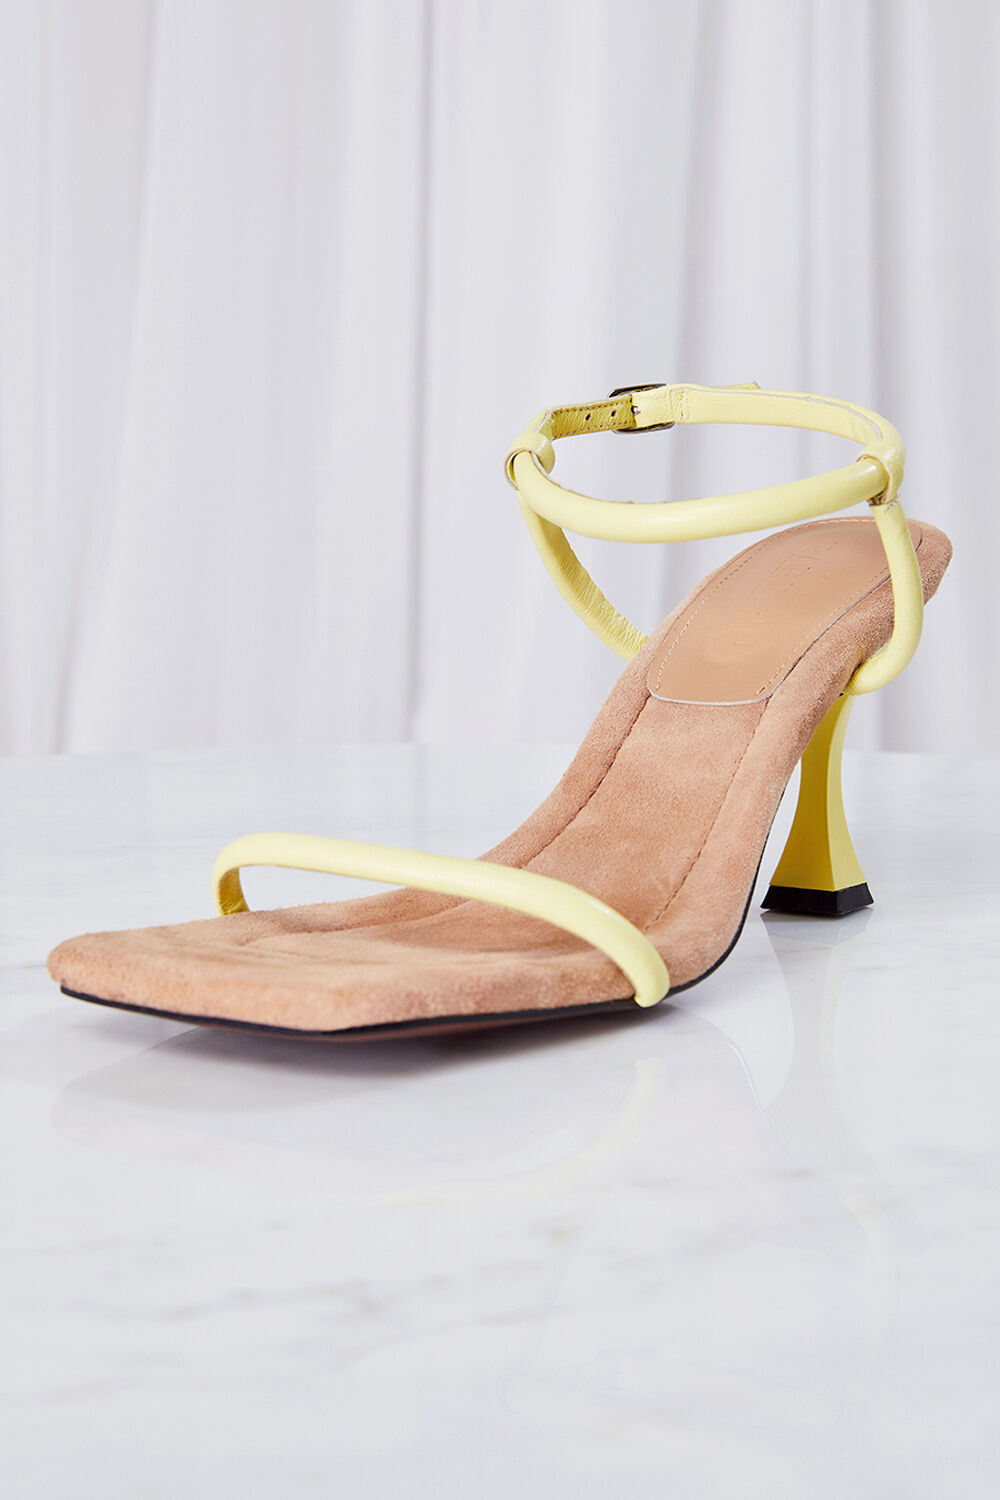 MILA STRAPPY HEEL in colour TRANSPARENT YELLOW